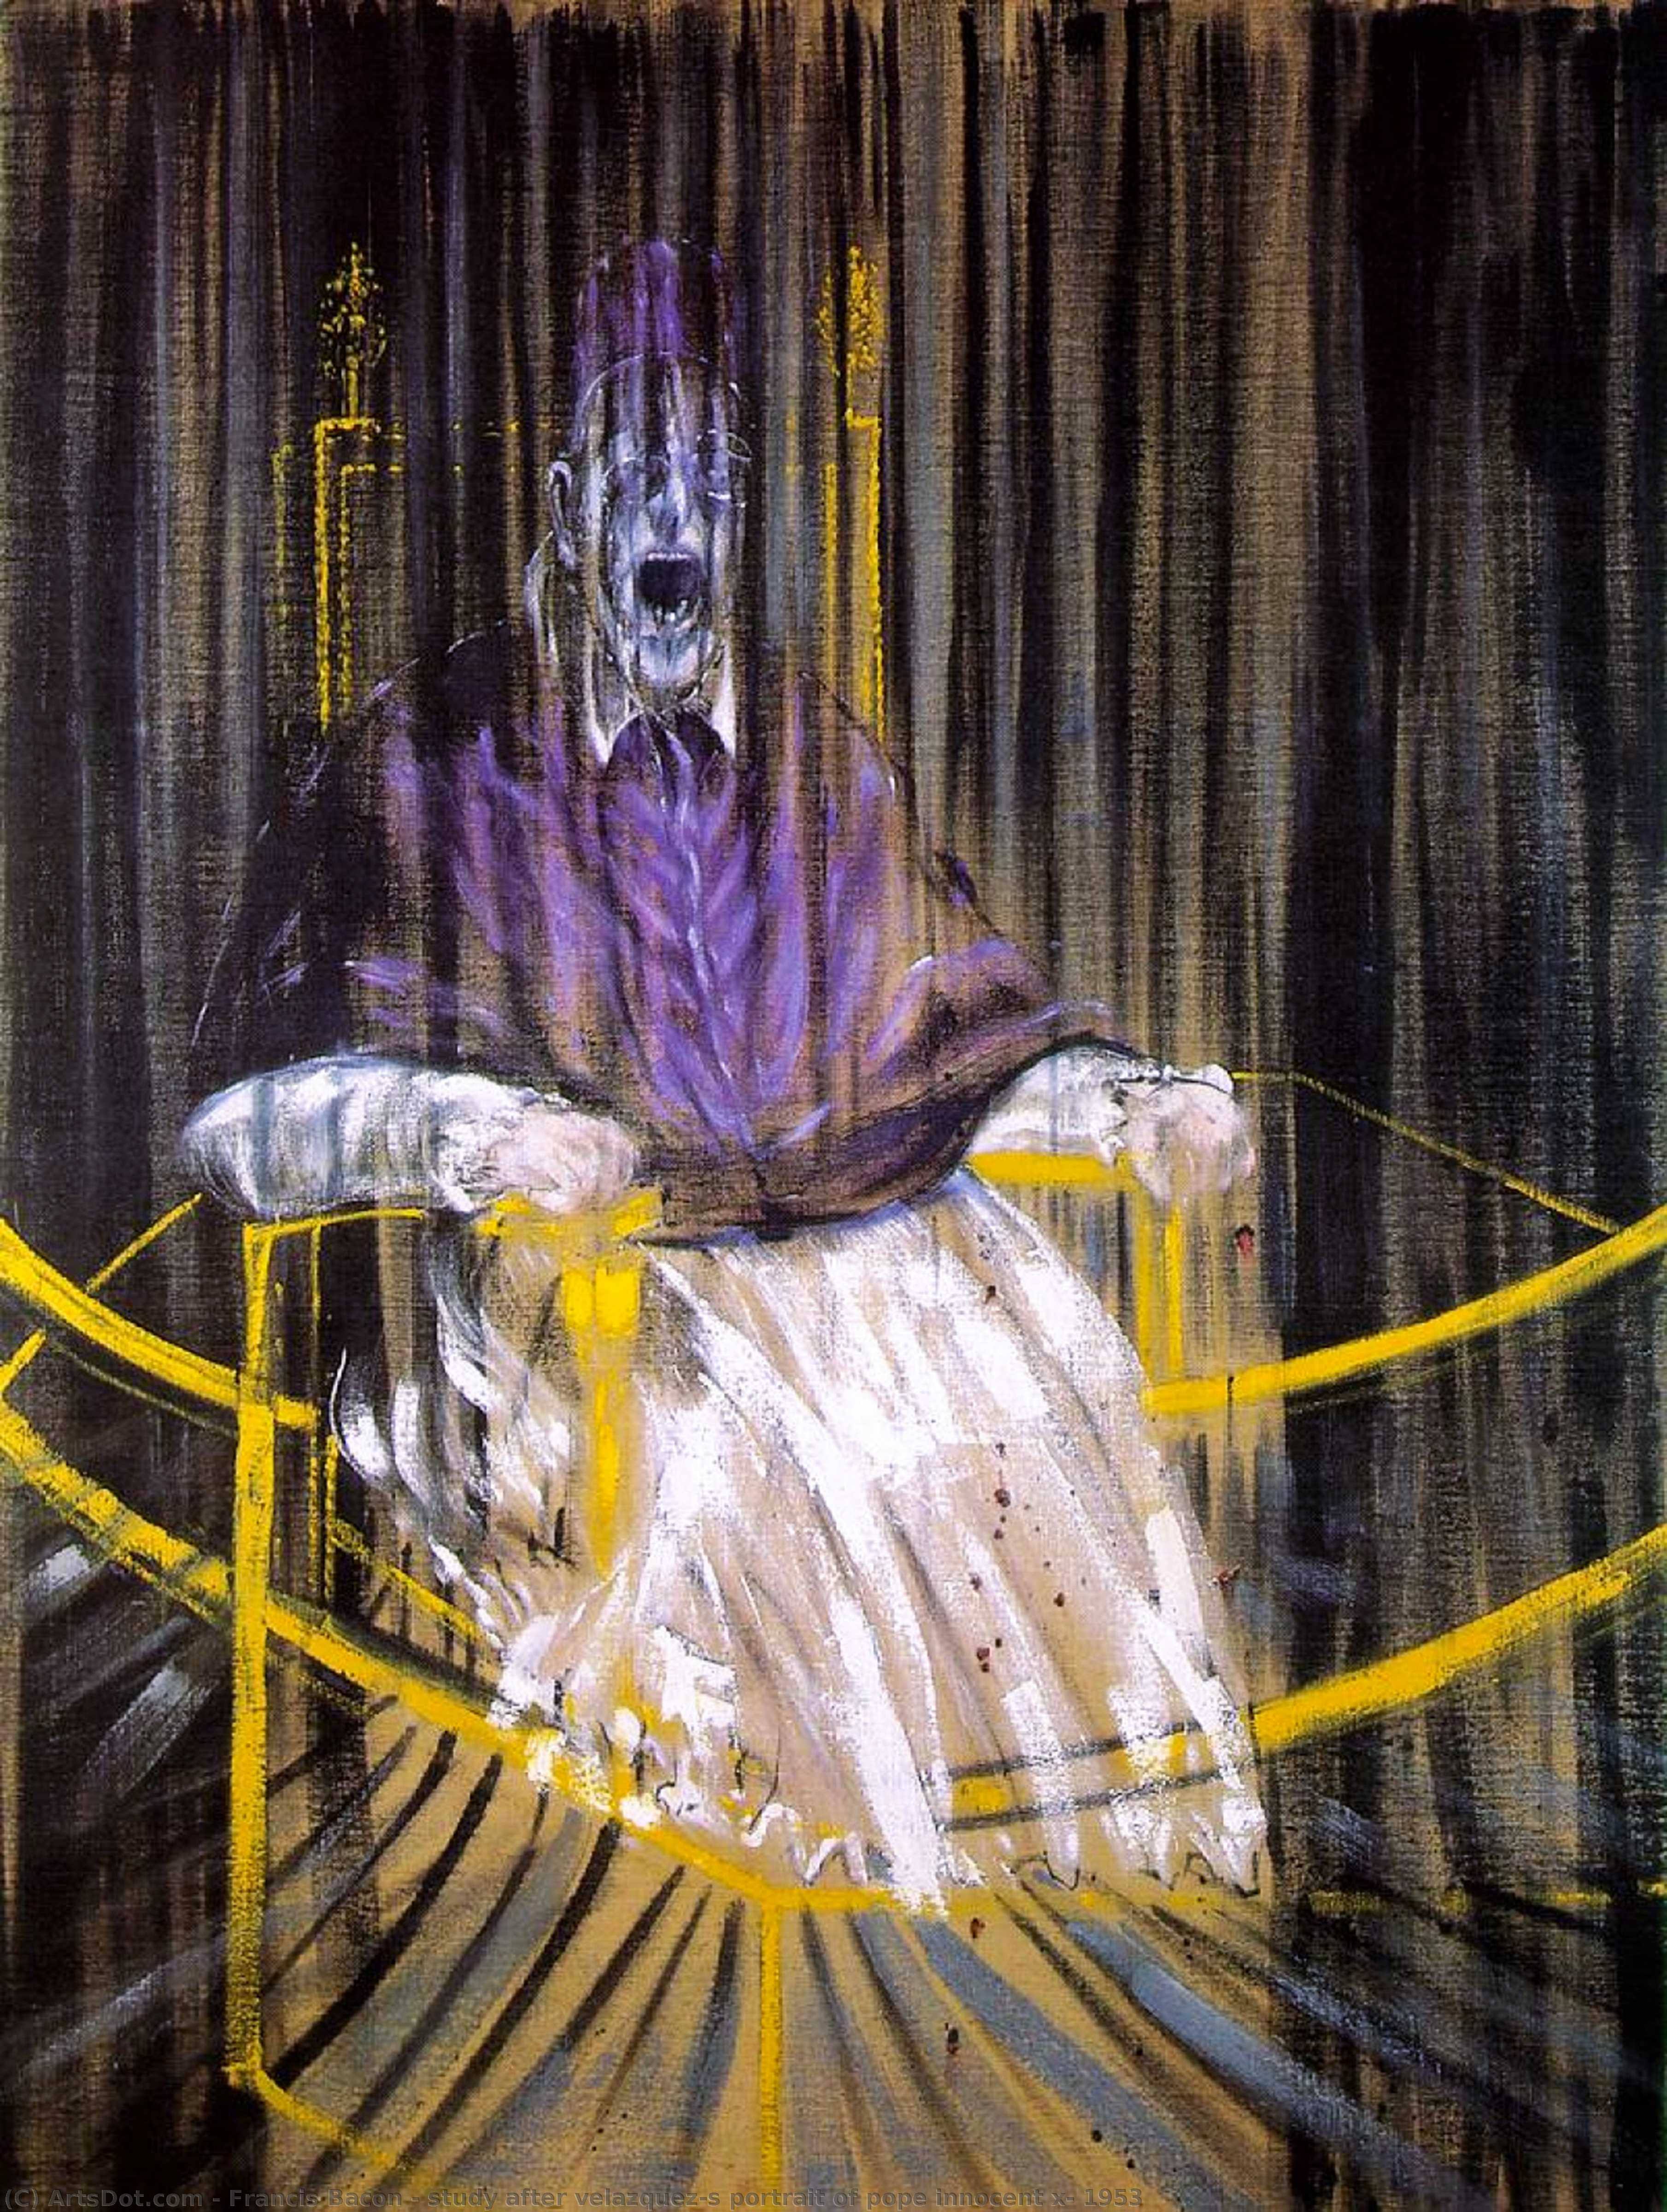 WikiOO.org - 백과 사전 - 회화, 삽화 Francis Bacon - study after velazquez's portrait of pope innocent x, 1953